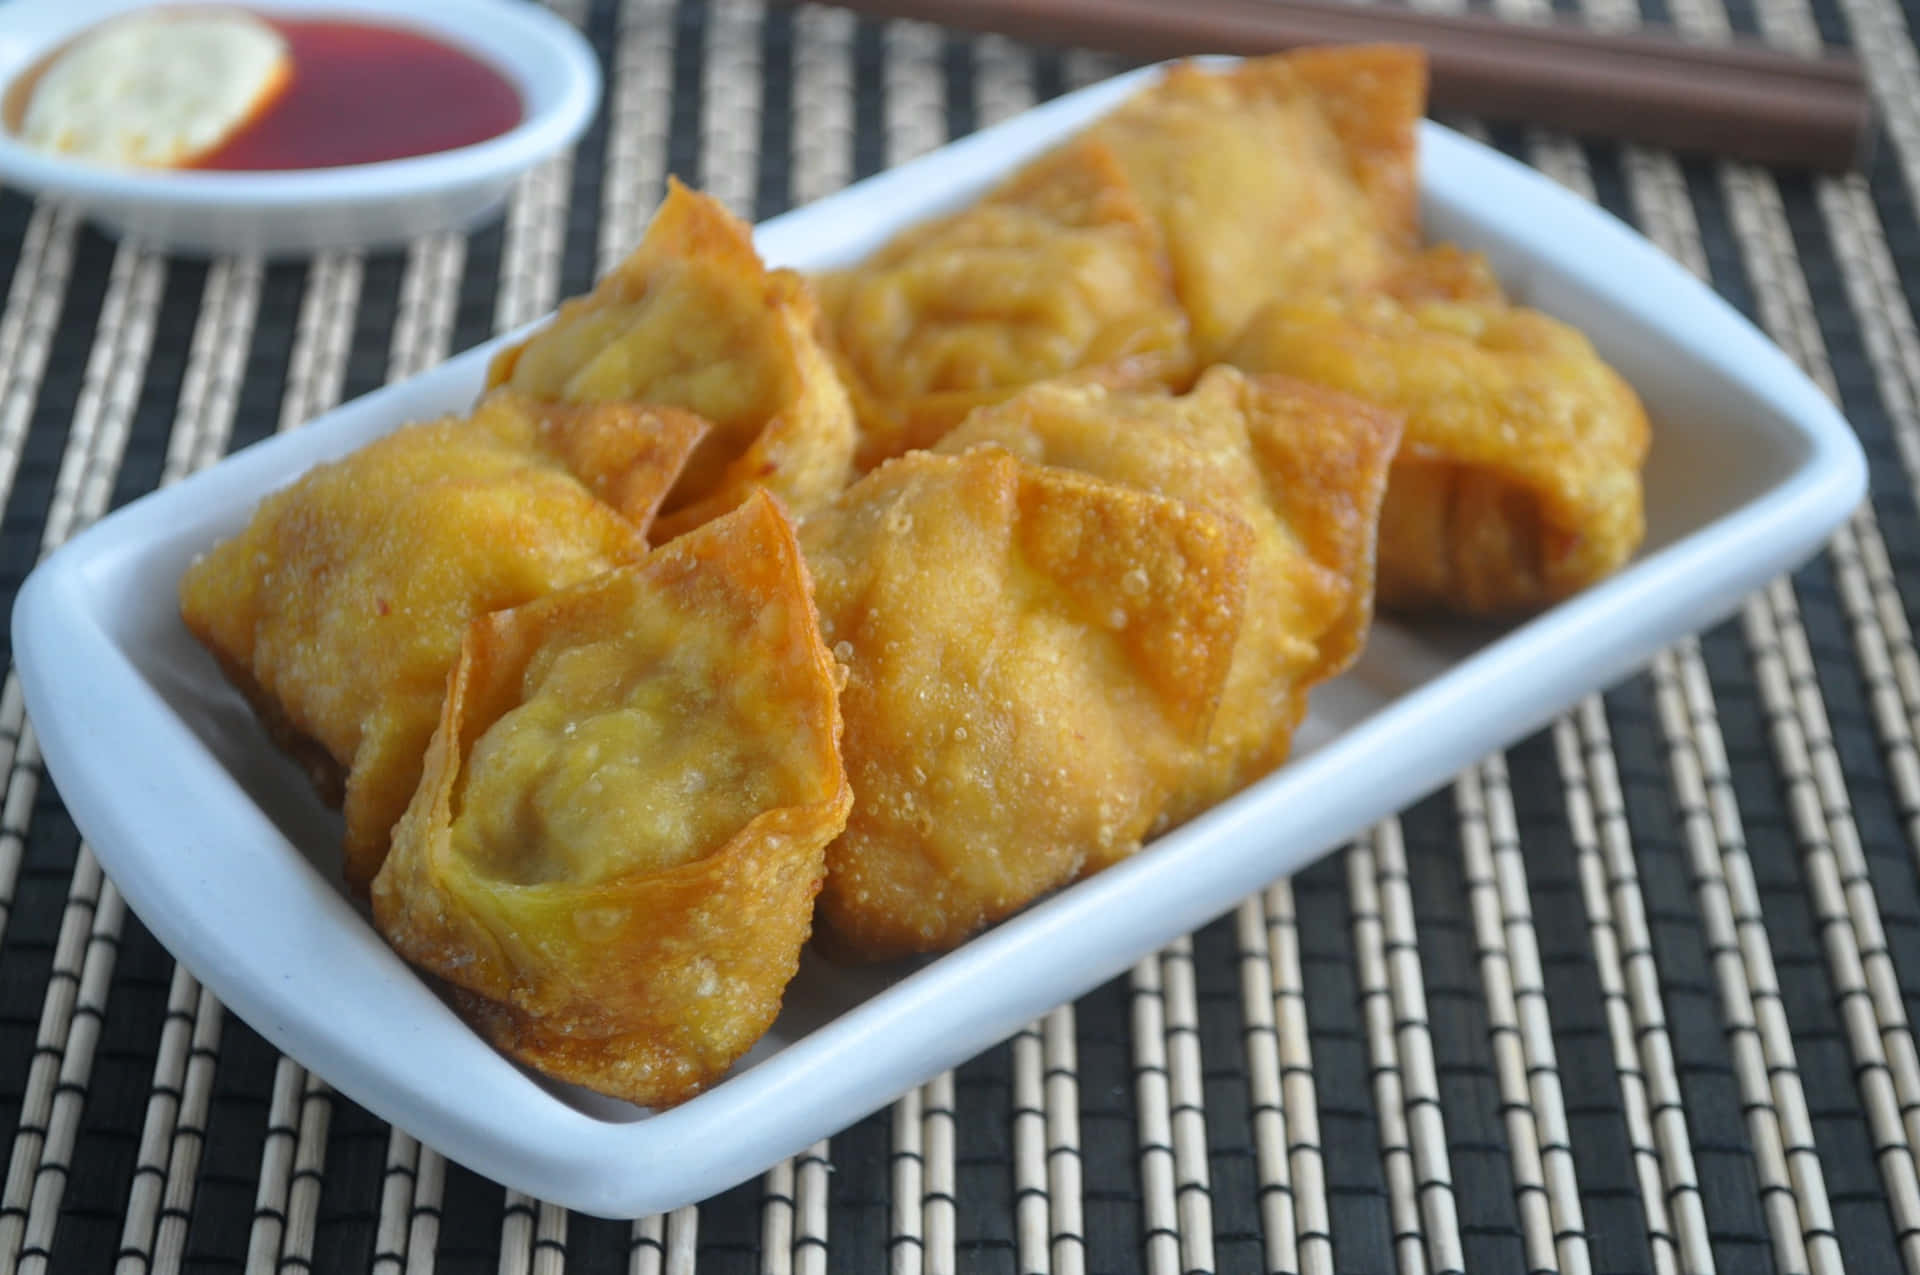 Fried Dumplings With Dipping Sauce